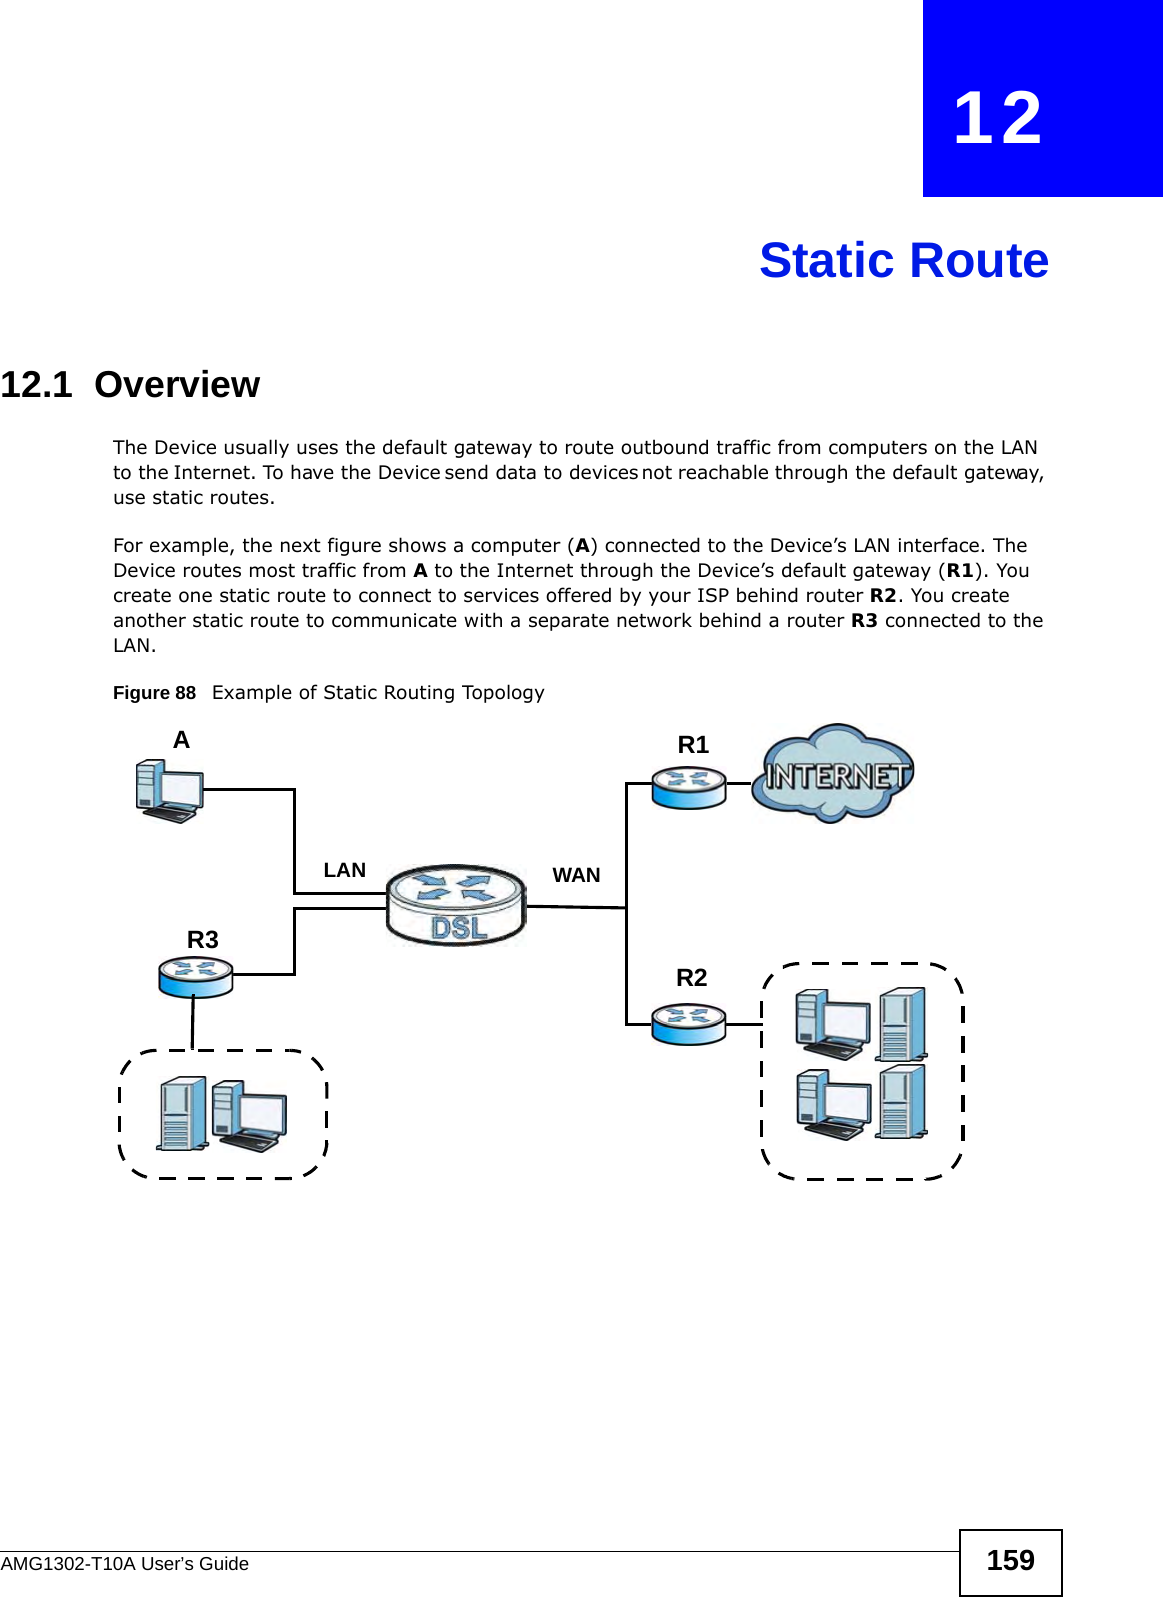 AMG1302-T10A User’s Guide 159CHAPTER   12Static Route12.1  Overview The Device usually uses the default gateway to route outbound traffic from computers on the LAN to the Internet. To have the Device send data to devices not reachable through the default gateway, use static routes.For example, the next figure shows a computer (A) connected to the Device’s LAN interface. The Device routes most traffic from A to the Internet through the Device’s default gateway (R1). You create one static route to connect to services offered by your ISP behind router R2. You create another static route to communicate with a separate network behind a router R3 connected to the LAN.   Figure 88   Example of Static Routing TopologyWANR1R2AR3LAN